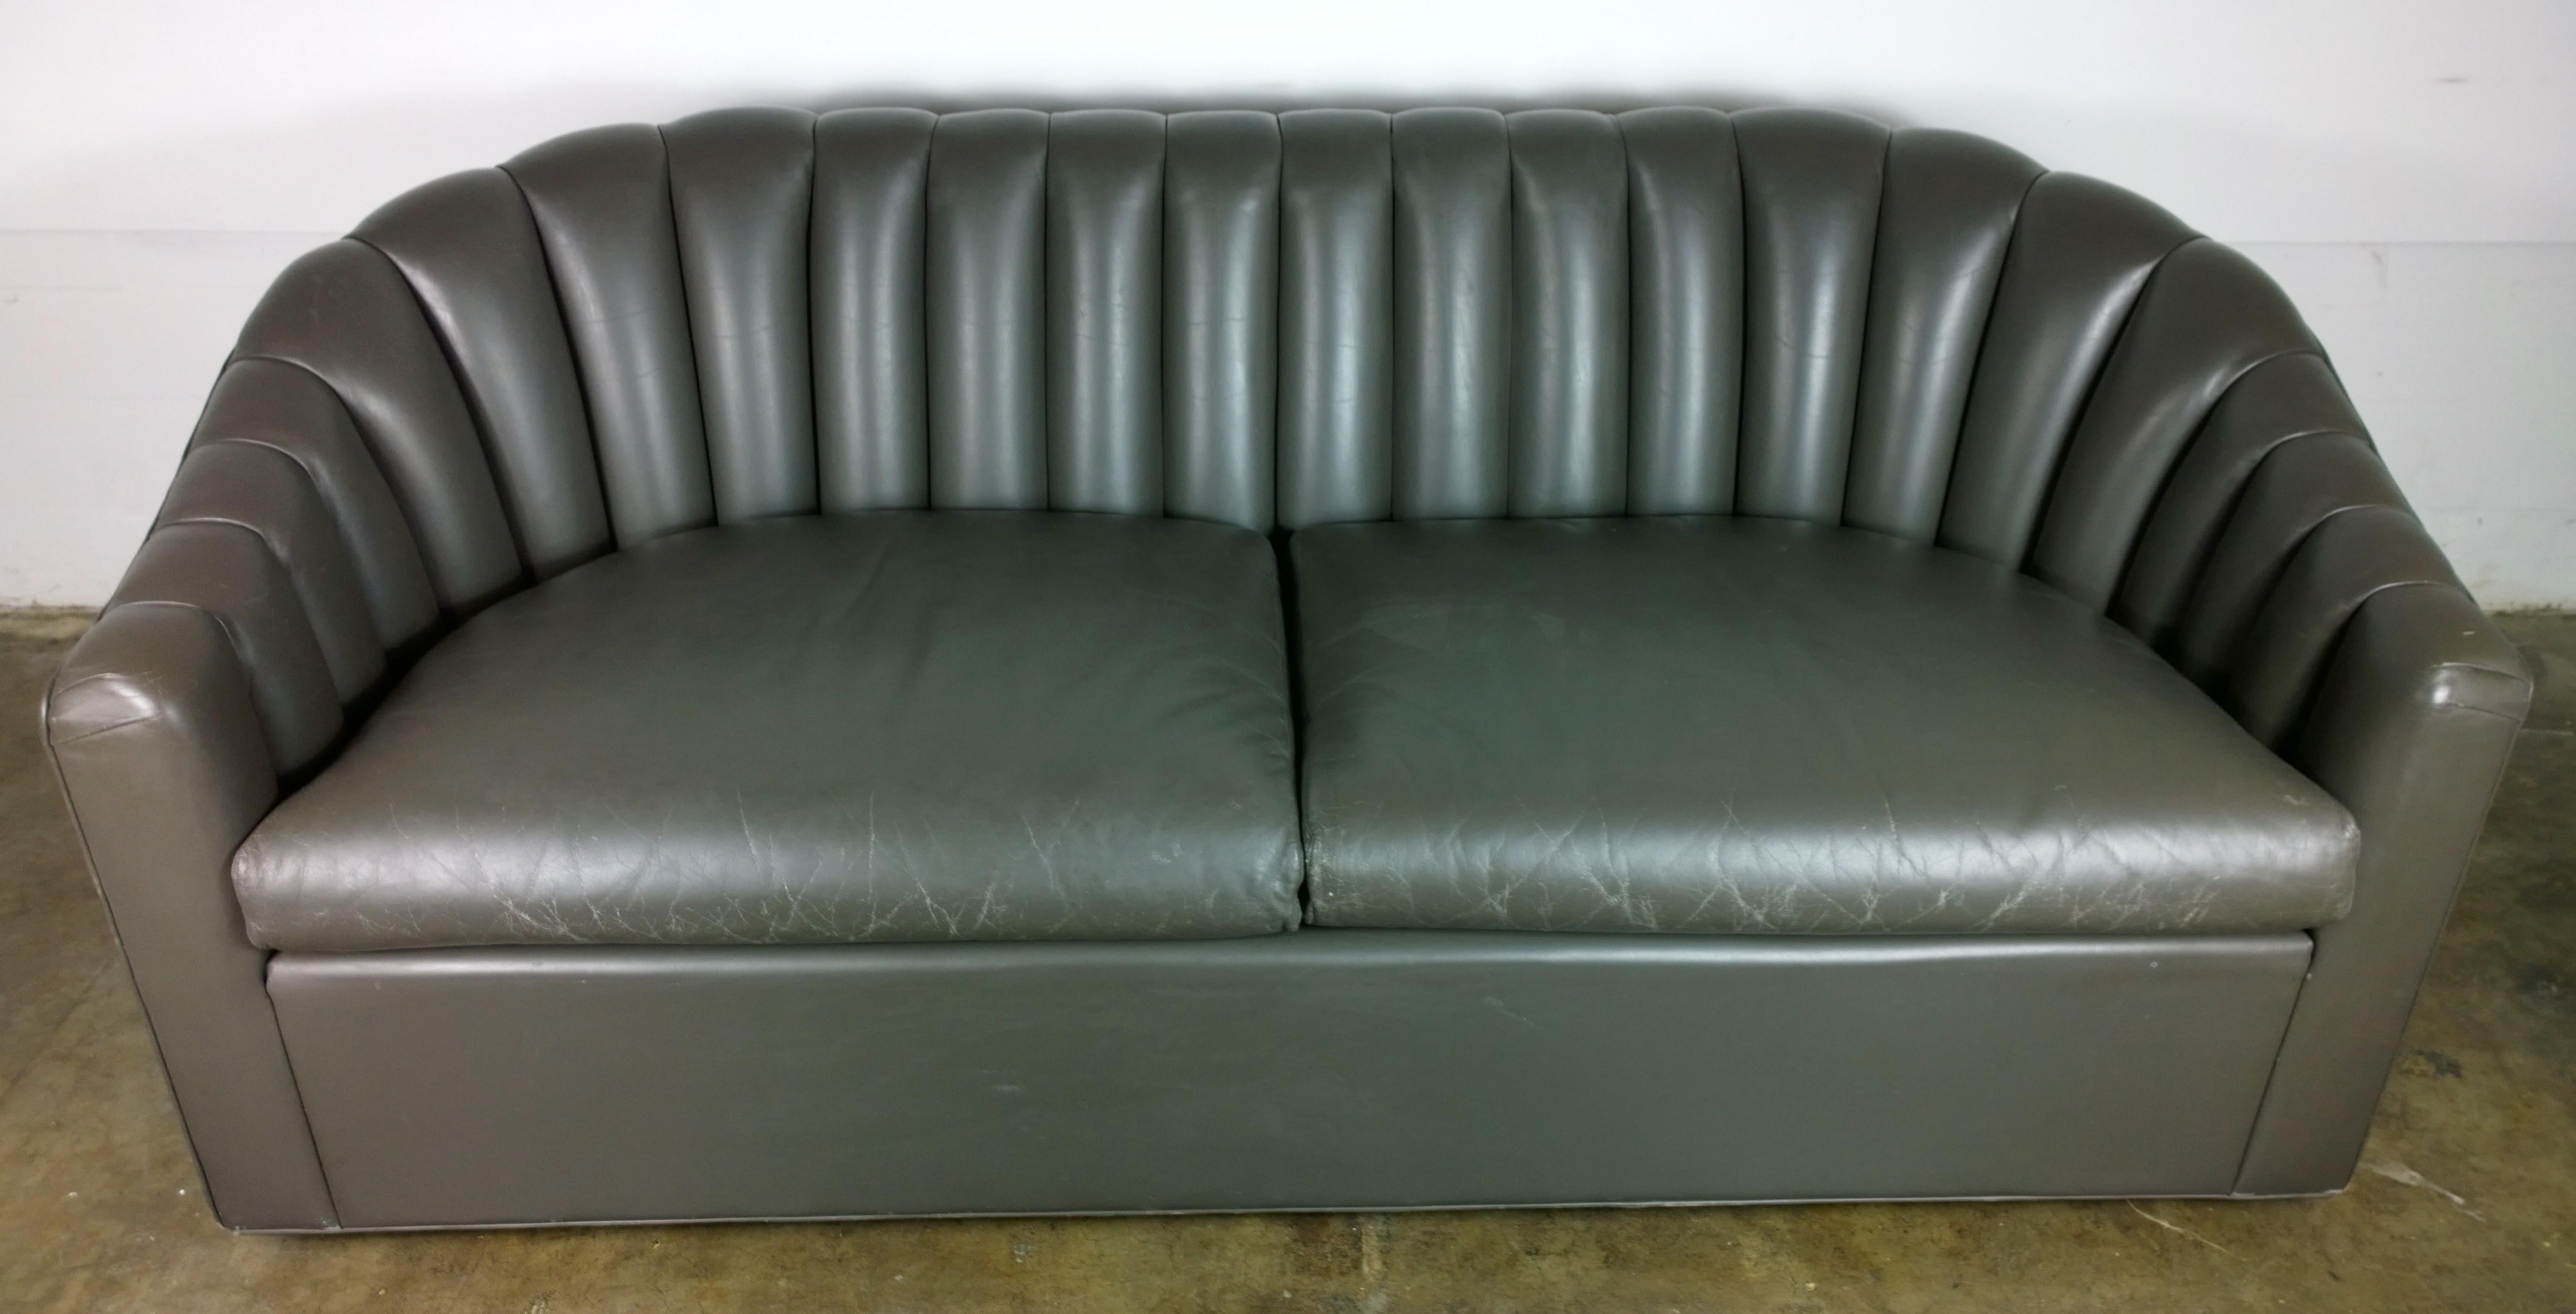 Offered is a Mid-Century Modern signed Jack Lenor Larson, Ward Bennett style beautiful and elegant grayish brown (milk chocolate) channel back leather two-cushion seat petite sofa or loveseat. The leather has a very rough hewn Ralph Lauren look.